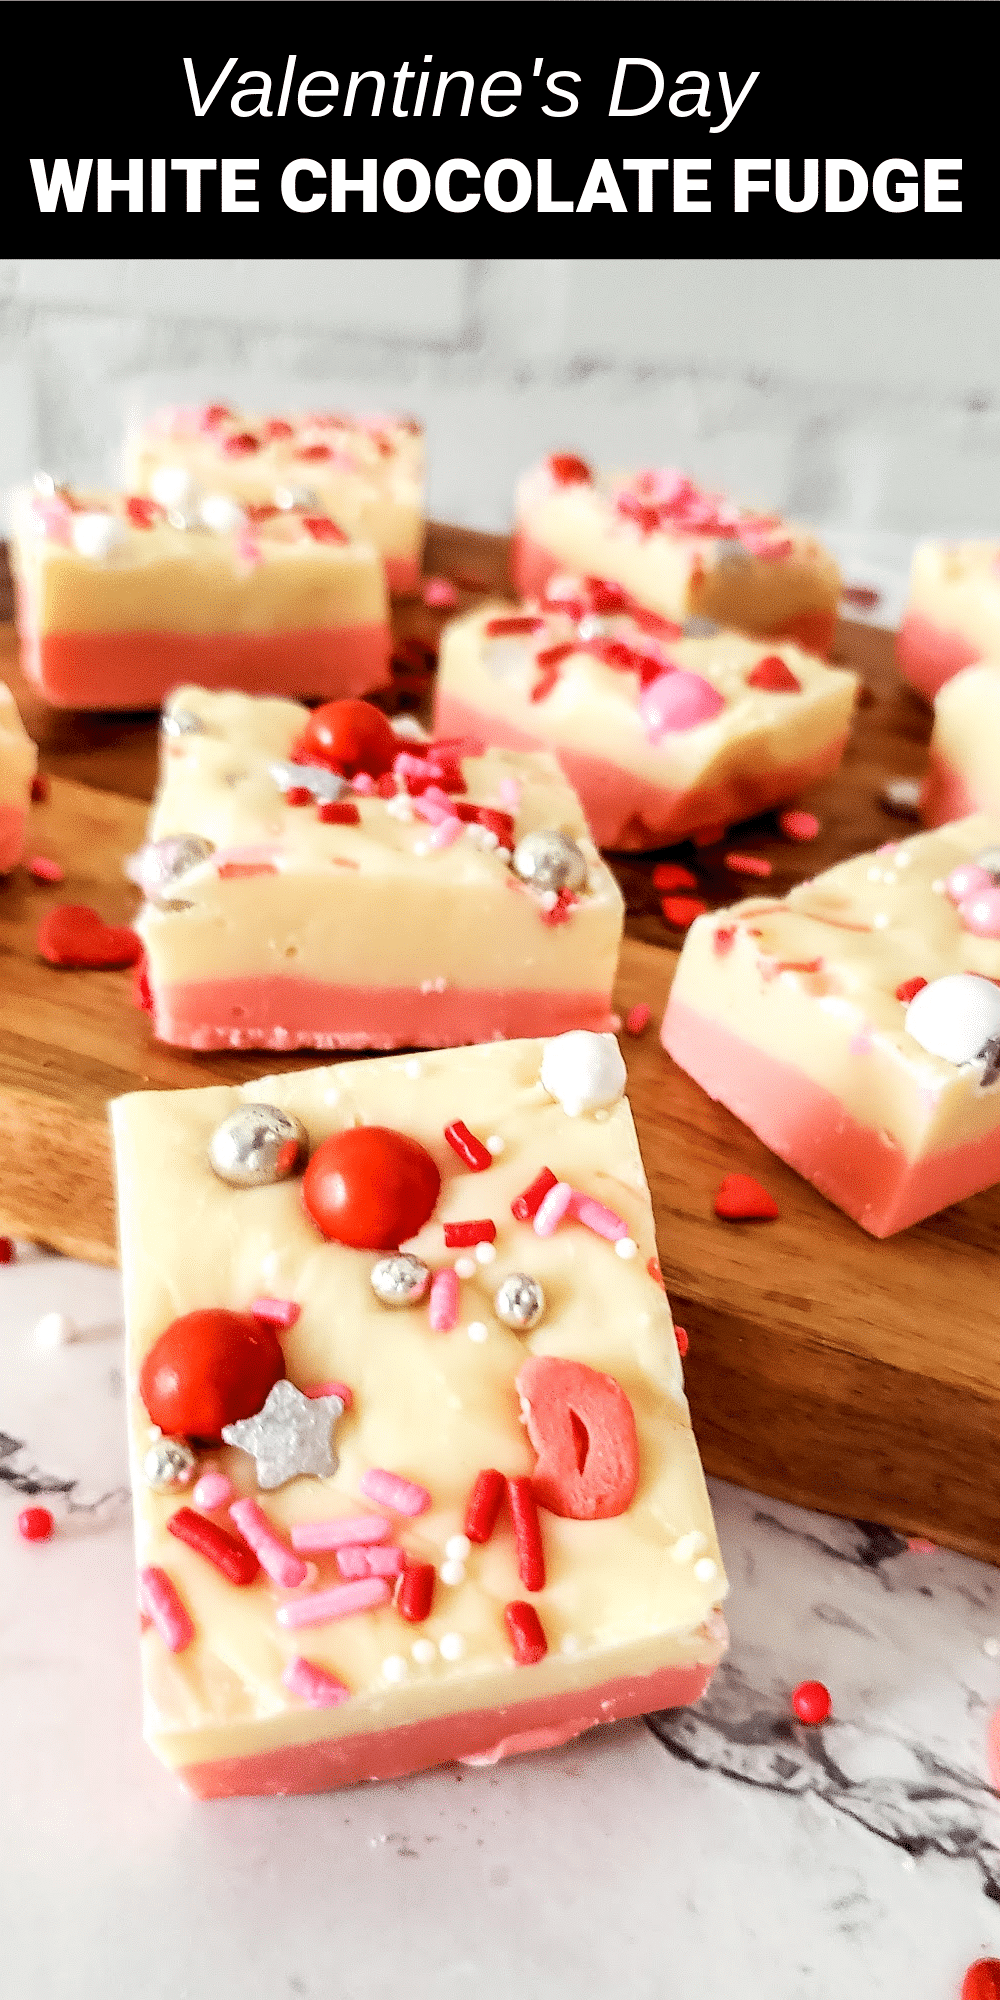 This Valentine’s Day fudge is an eye-catching sweet treat that’s a perfect choice for the holiday. You can’t go wrong with a classic chocolate fudge for your Valentine, and this indulgent recipe uses creamy white chocolate for a fun spin on the traditional fudge recipe. 